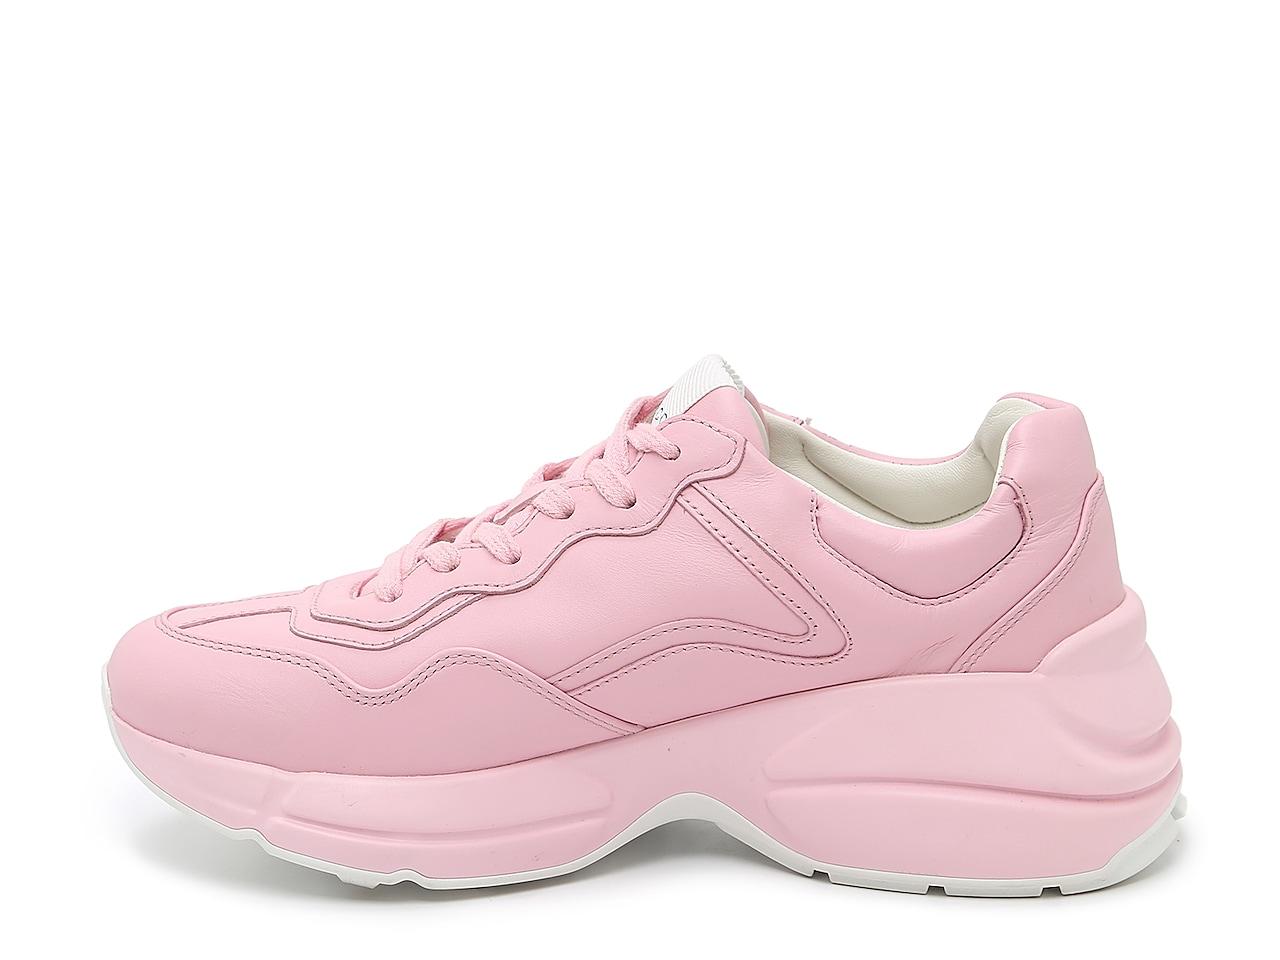 Gucci Leather Rhyton Sneaker in Pink | Lyst